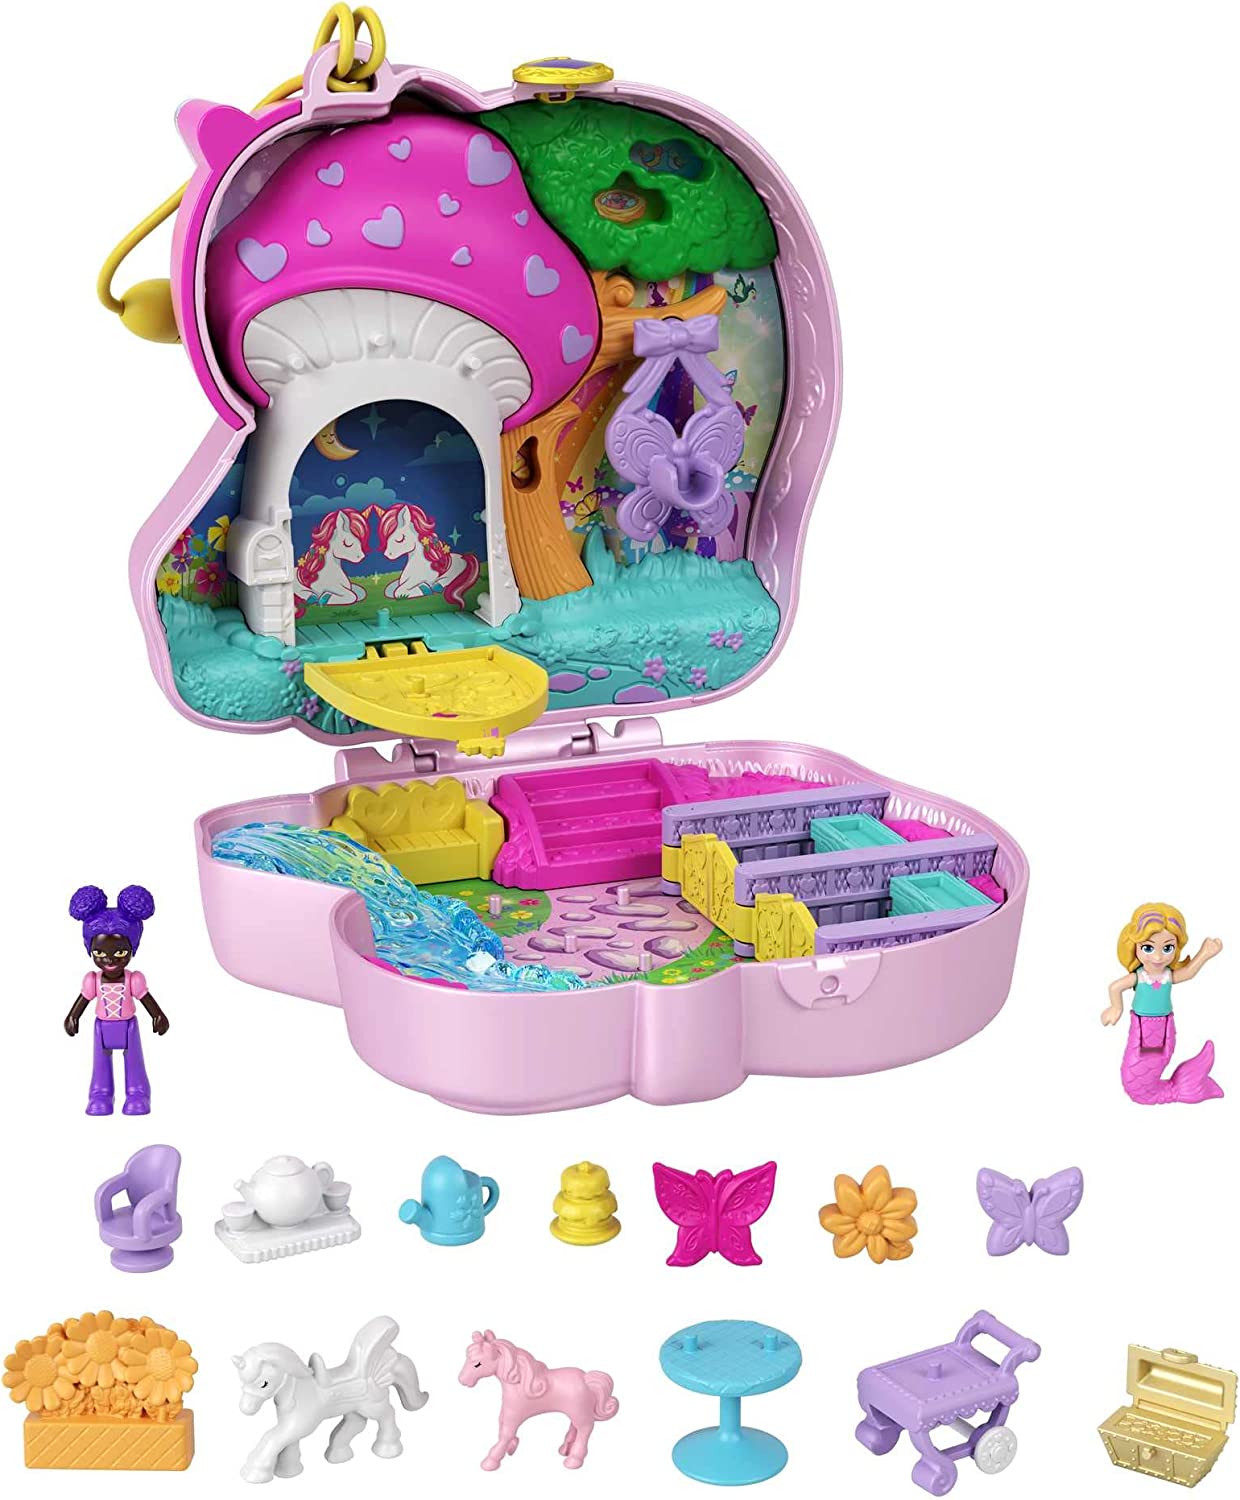 Polly Pocket World Unicorn Forest Compact